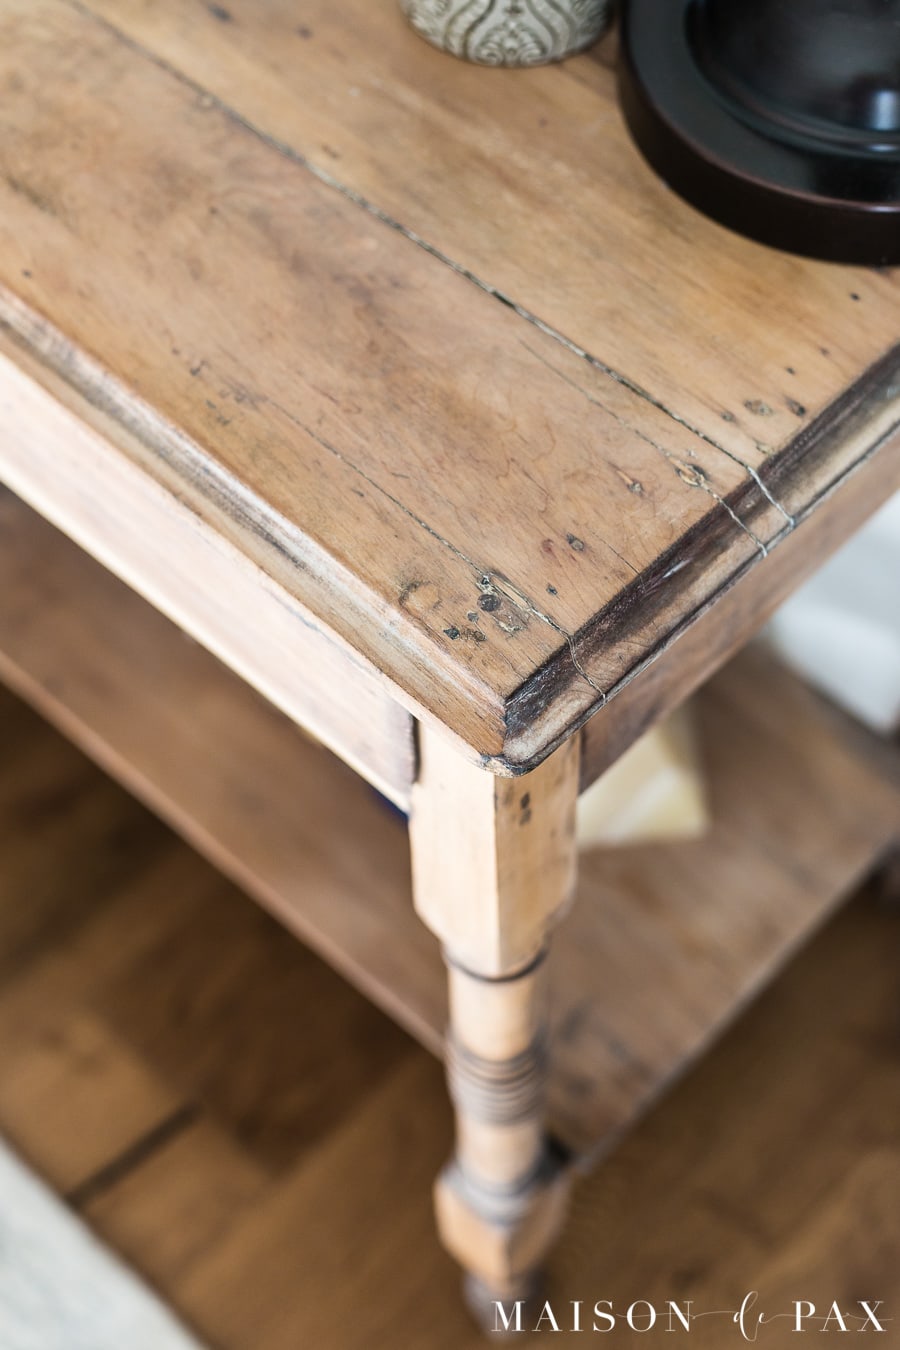 Natural wood look: find out how to get rid of the orange! Seal your wood and yet retain that raw wood look when refinishing vintage furniture #diyfurniture #furnituremakeover #diyproject #rawwood #rusticmodern #naturalwood